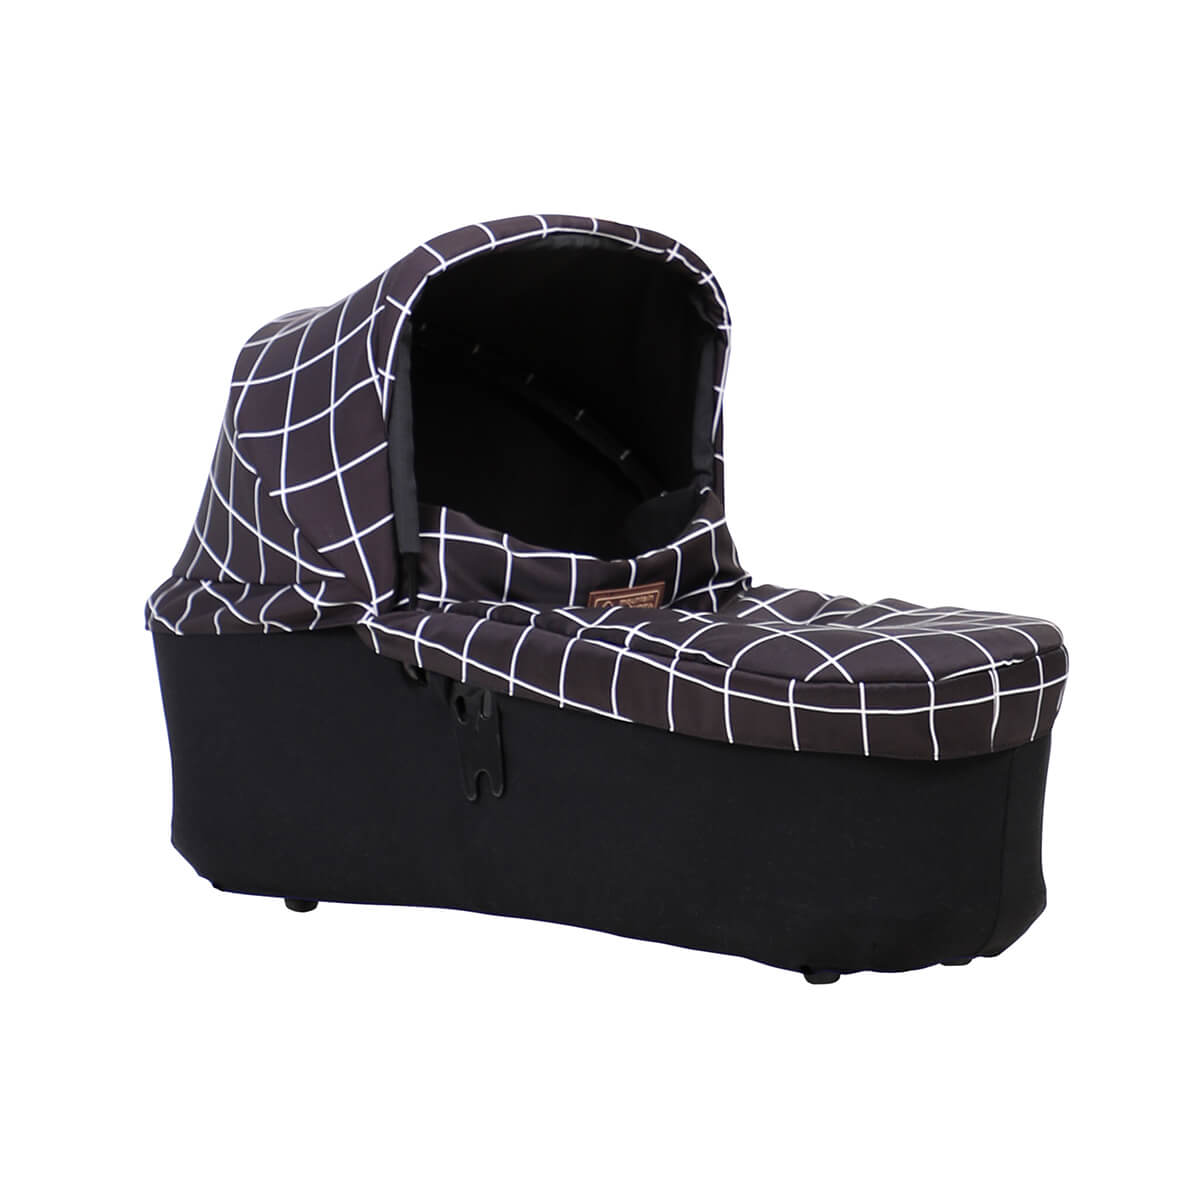 mountain buggy duet carrycot plus in lie flat mode 3/4 view shown in color grid_grid